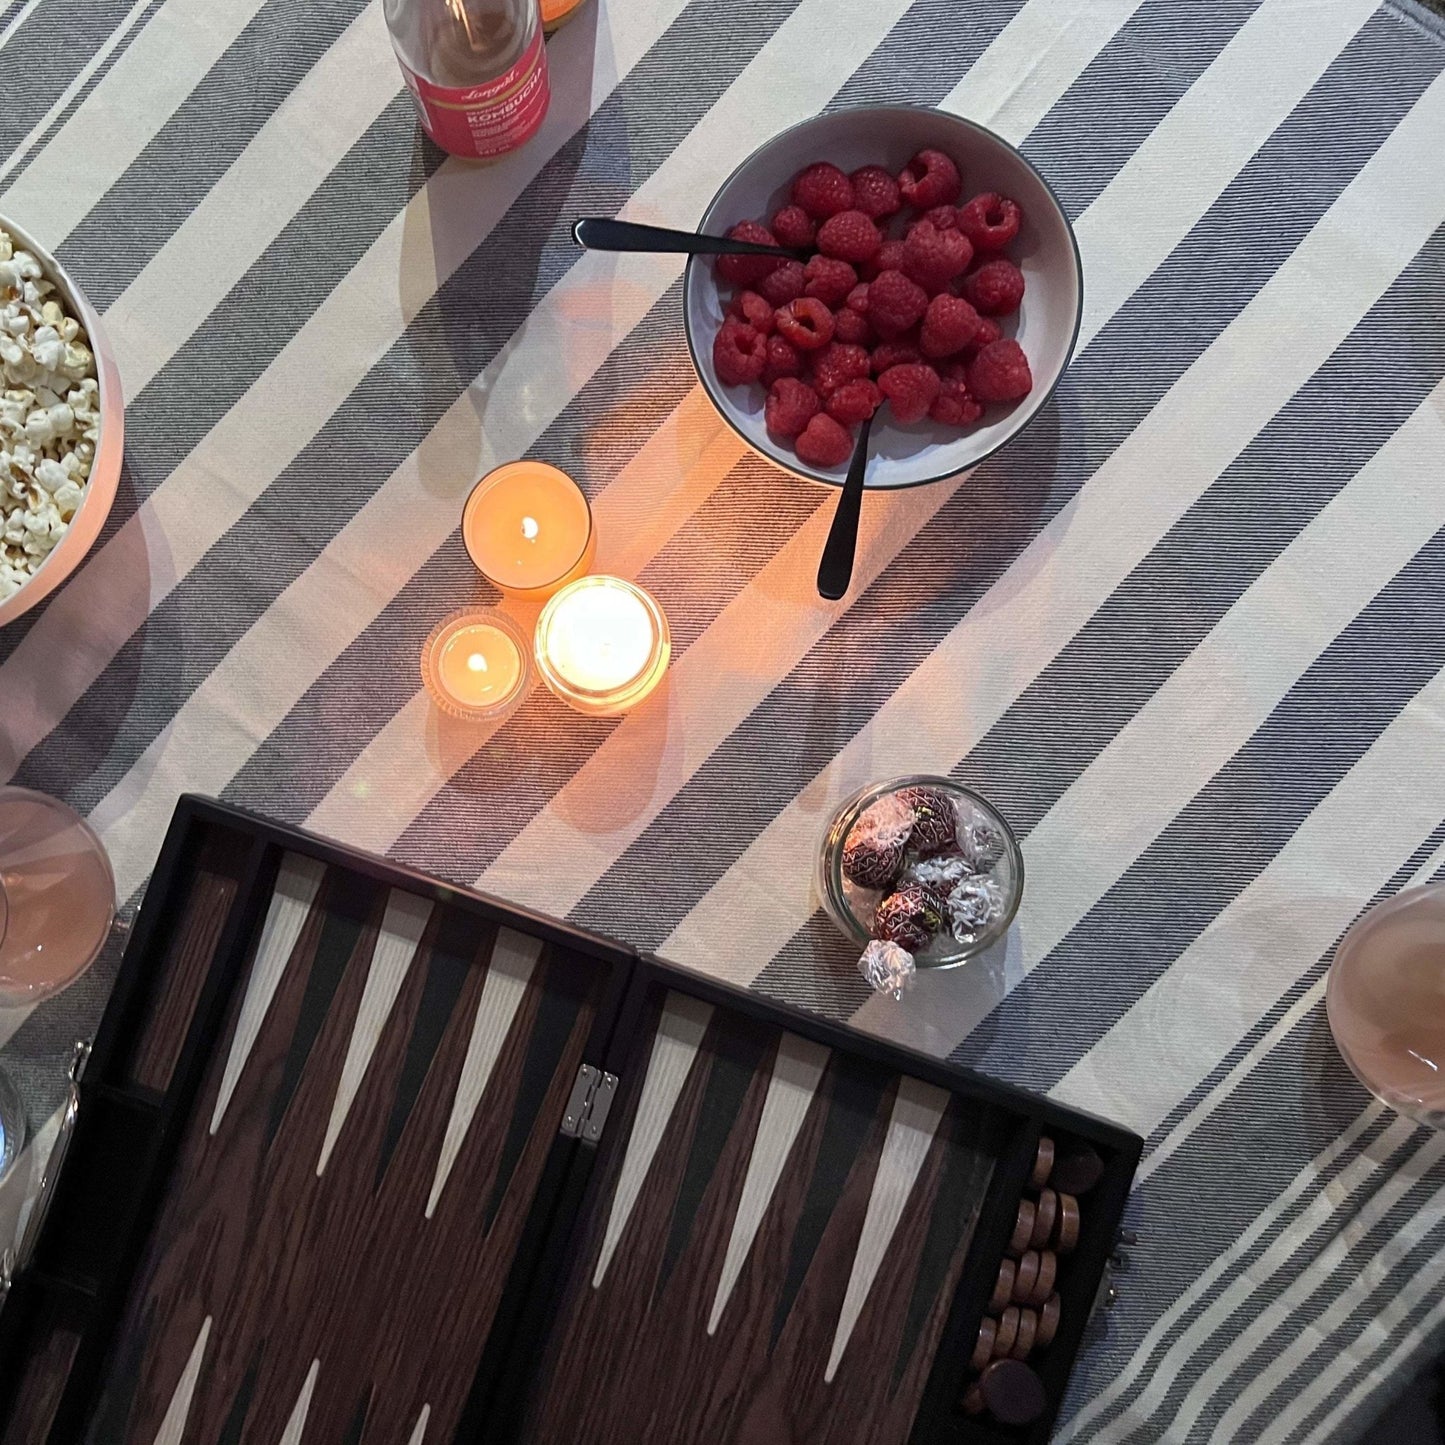 Candle lit raspberry snacks and board games on a striped Turkish towel covered code table | SENDE